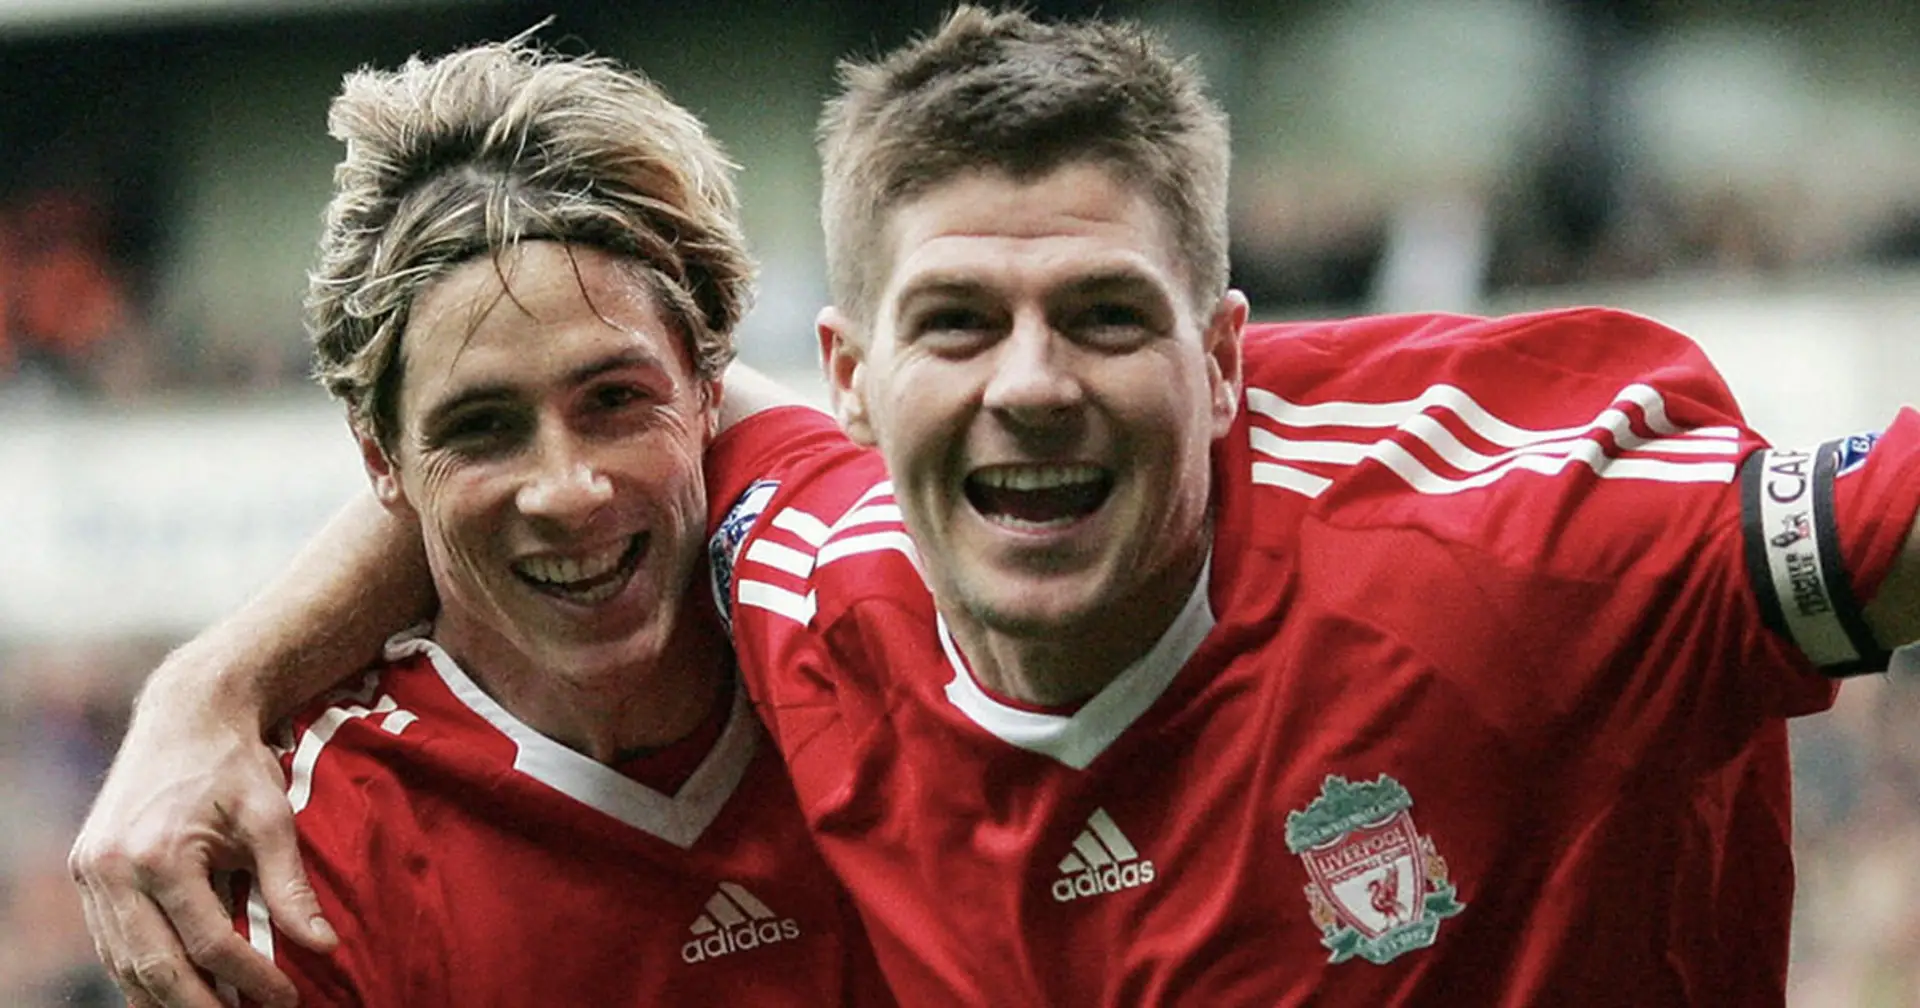 'They all speak Spanish and each of them unleashes a wave of emotion in me': Gerrard names 3 best Liverpool signings of his time